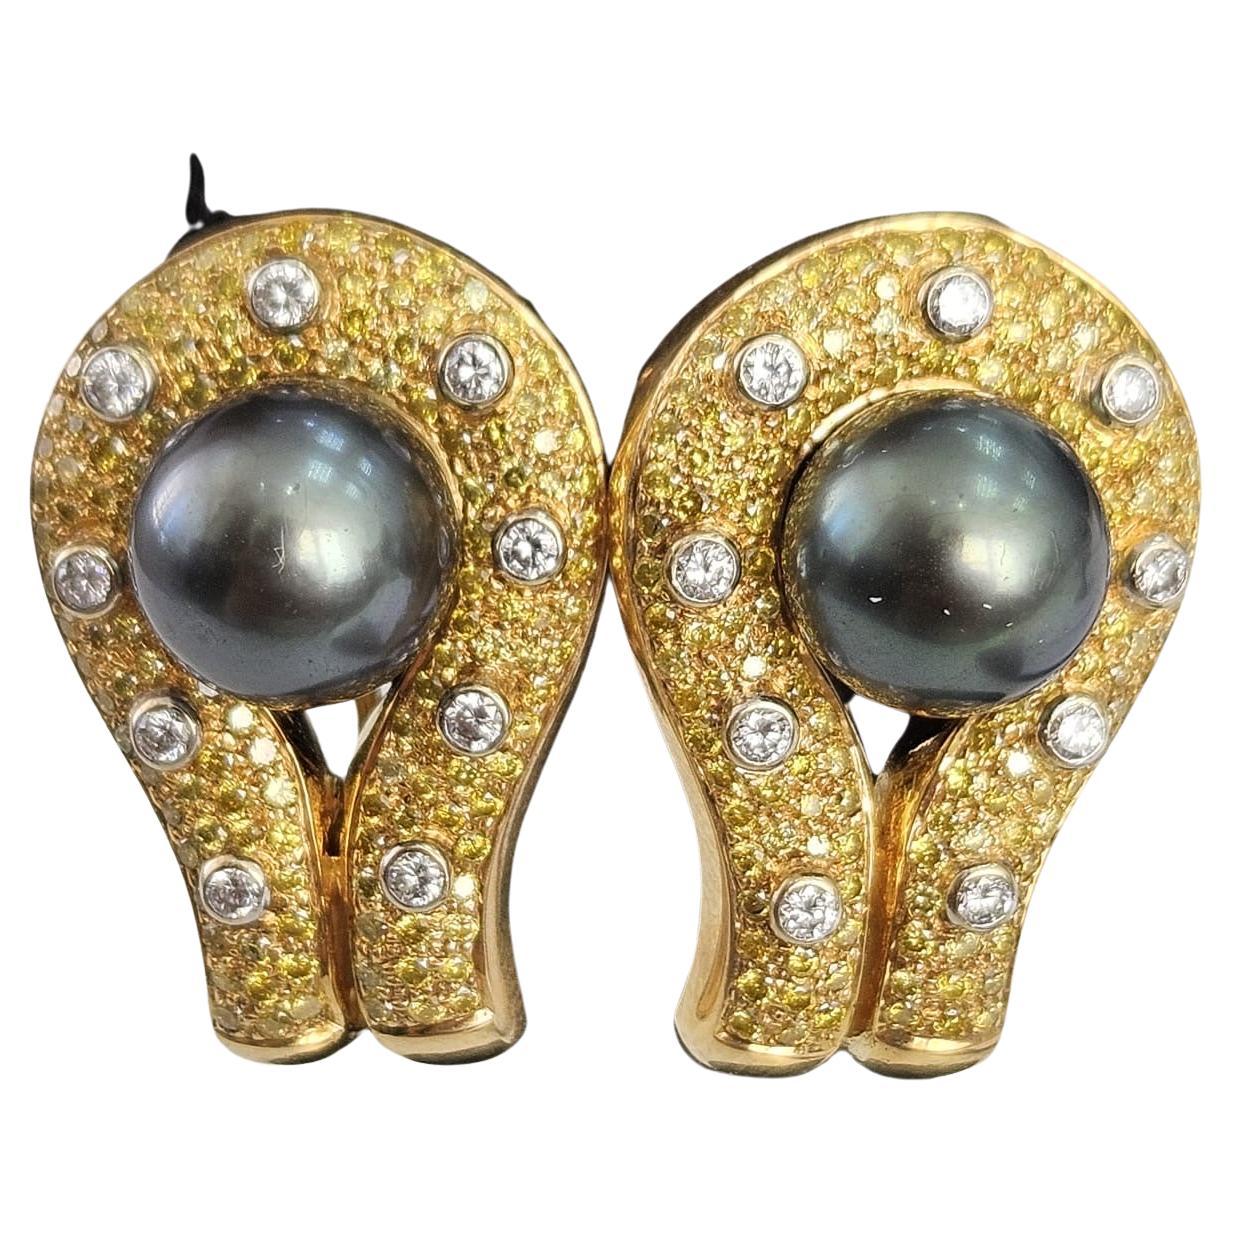 14.87 cts Canary Diamond with Pearls and White Diamond Earrings